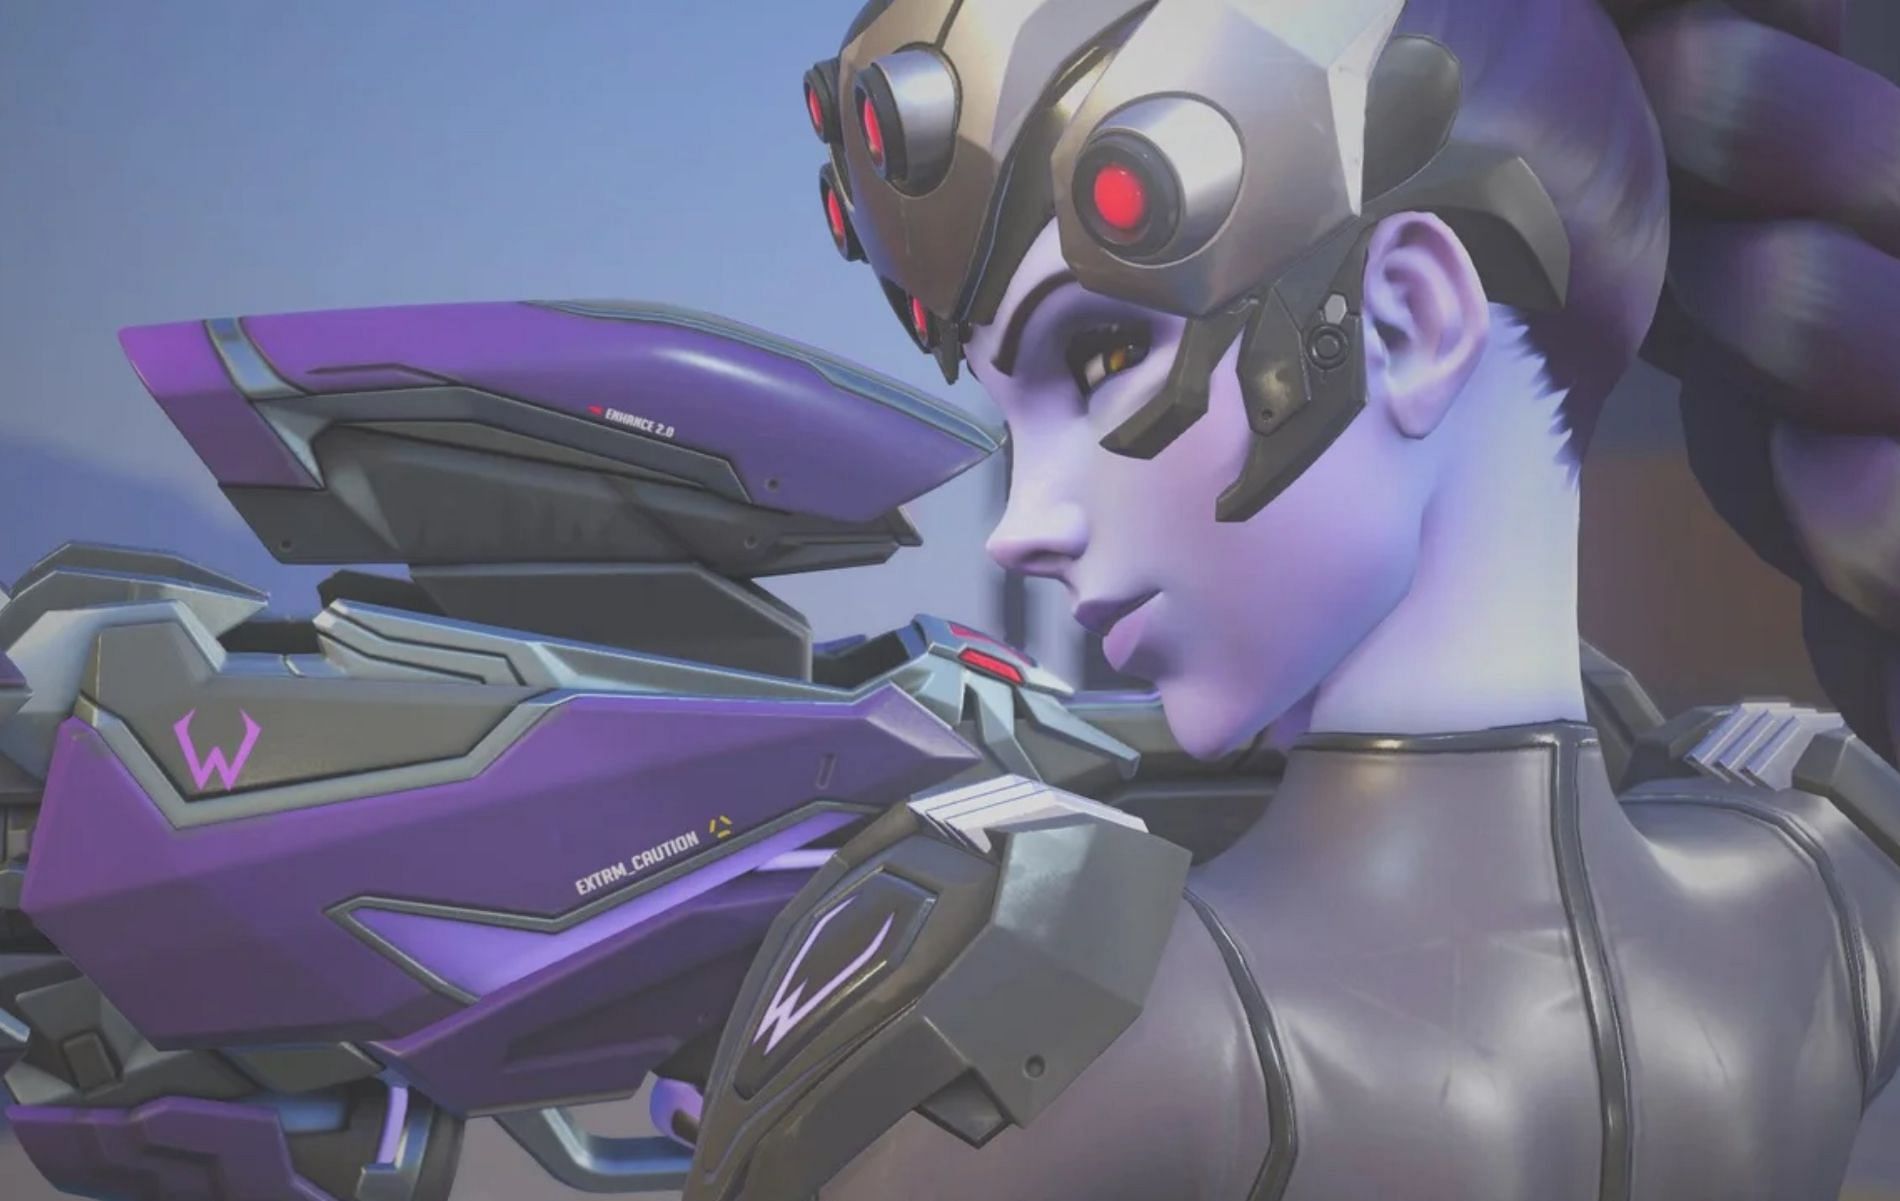 Widowmaker can kill heroes peeking out of safety (Image via Blizzard Entertainment)